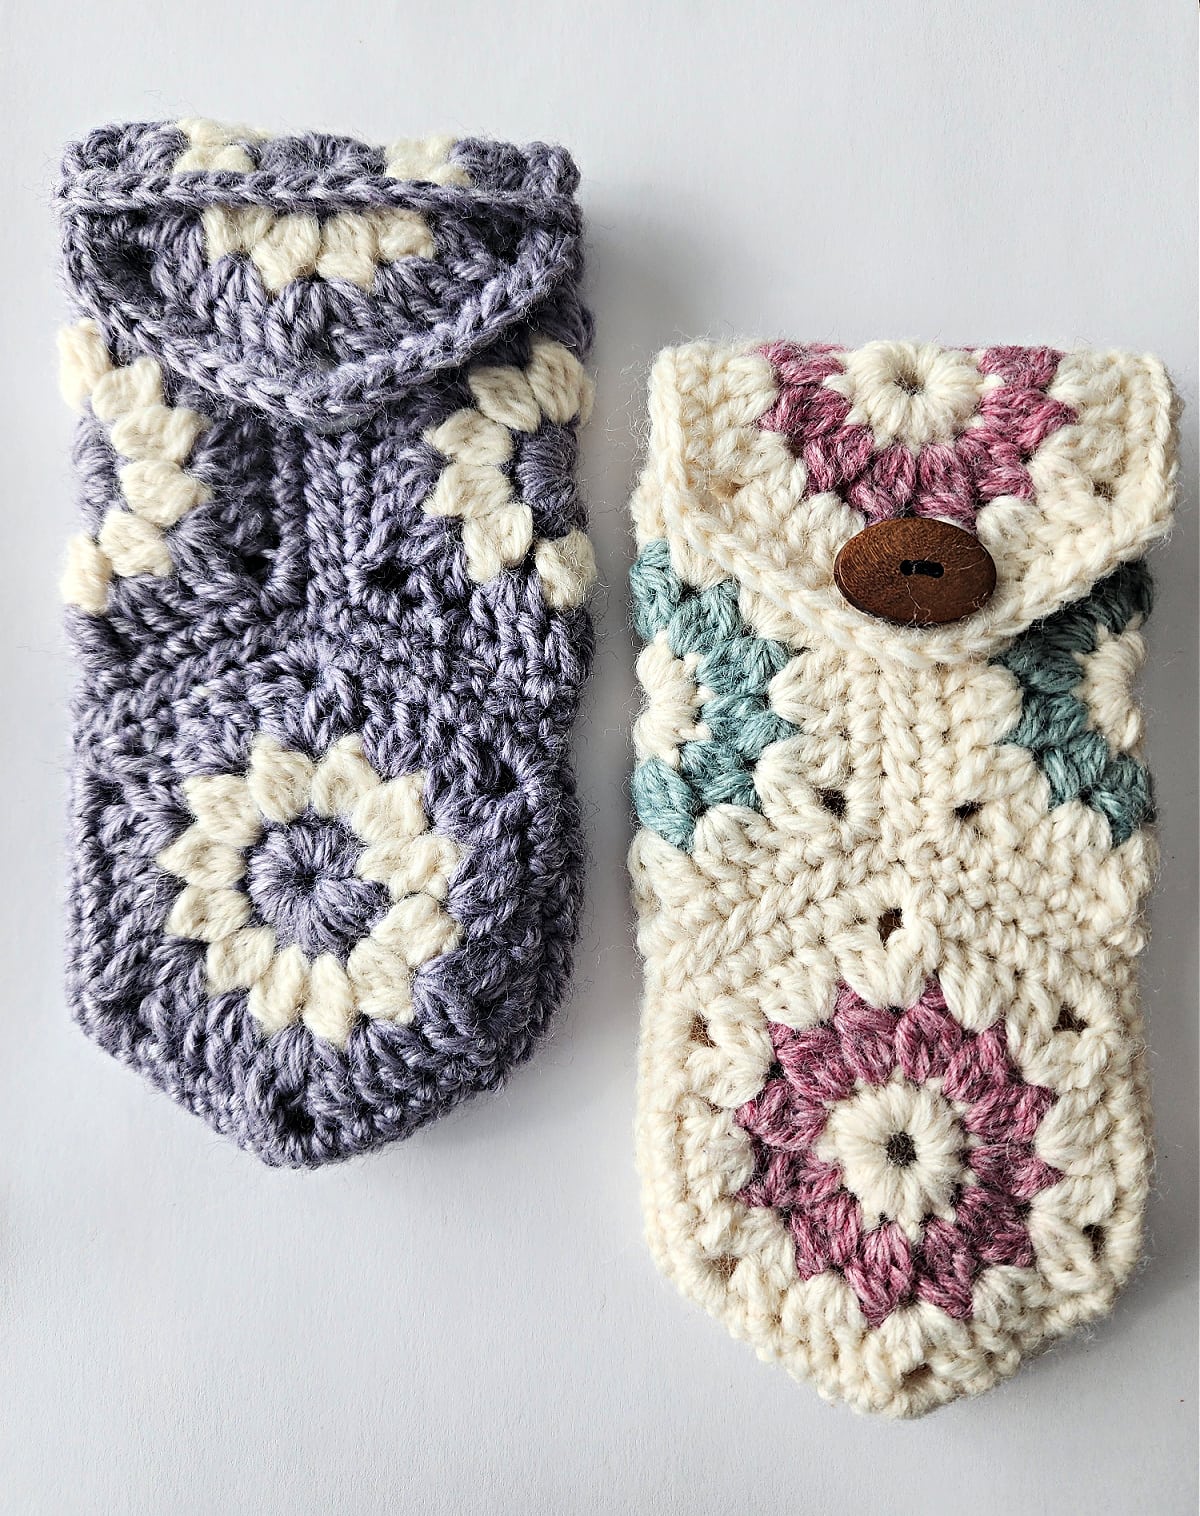 Two crochet eyeglass cases. One with button closure and the other with a strap closer.